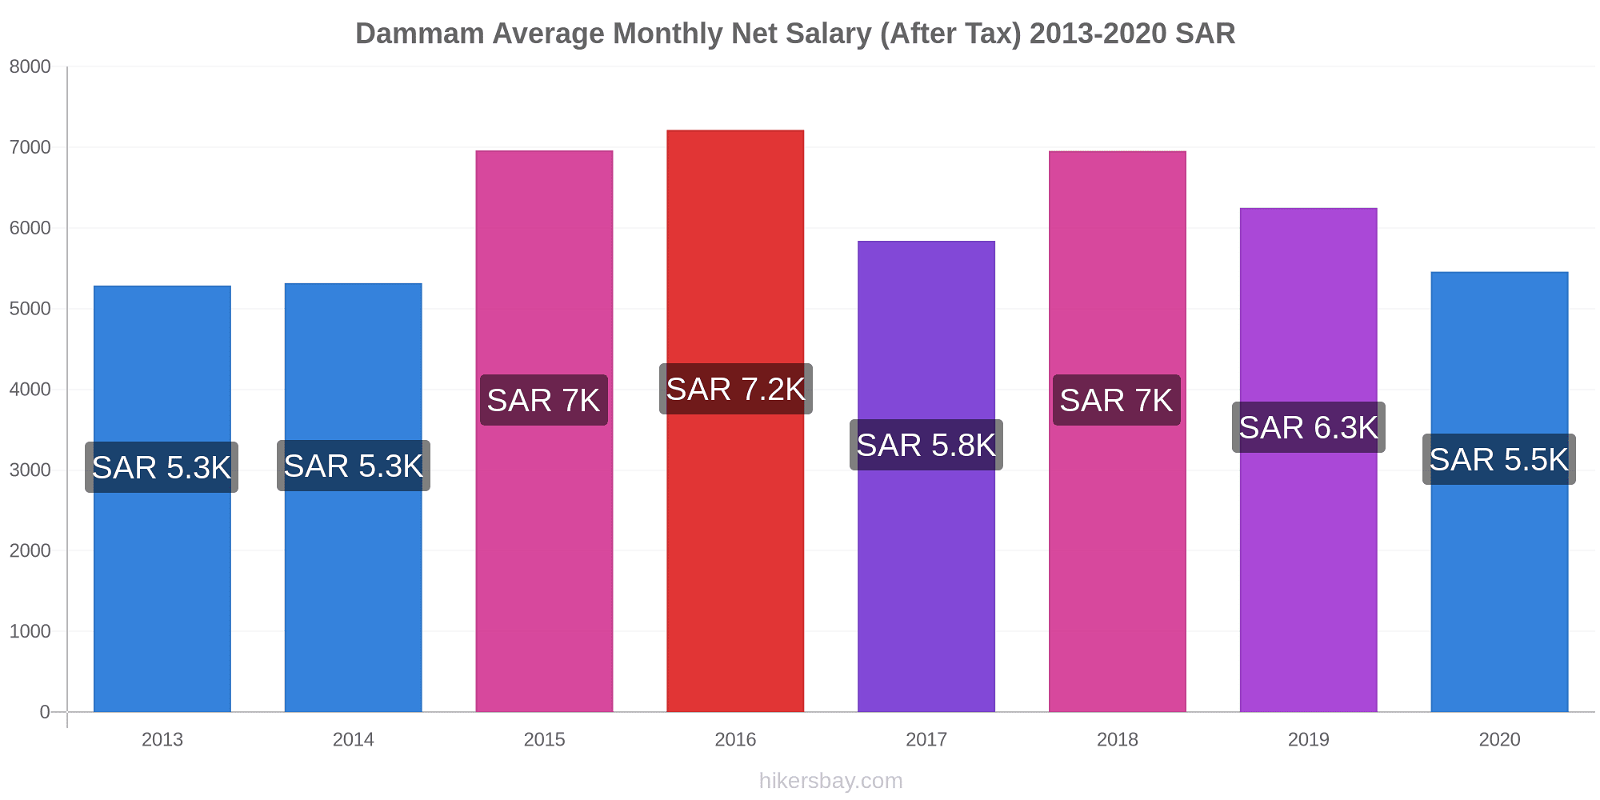 Dammam price changes Average Monthly Net Salary (After Tax) hikersbay.com